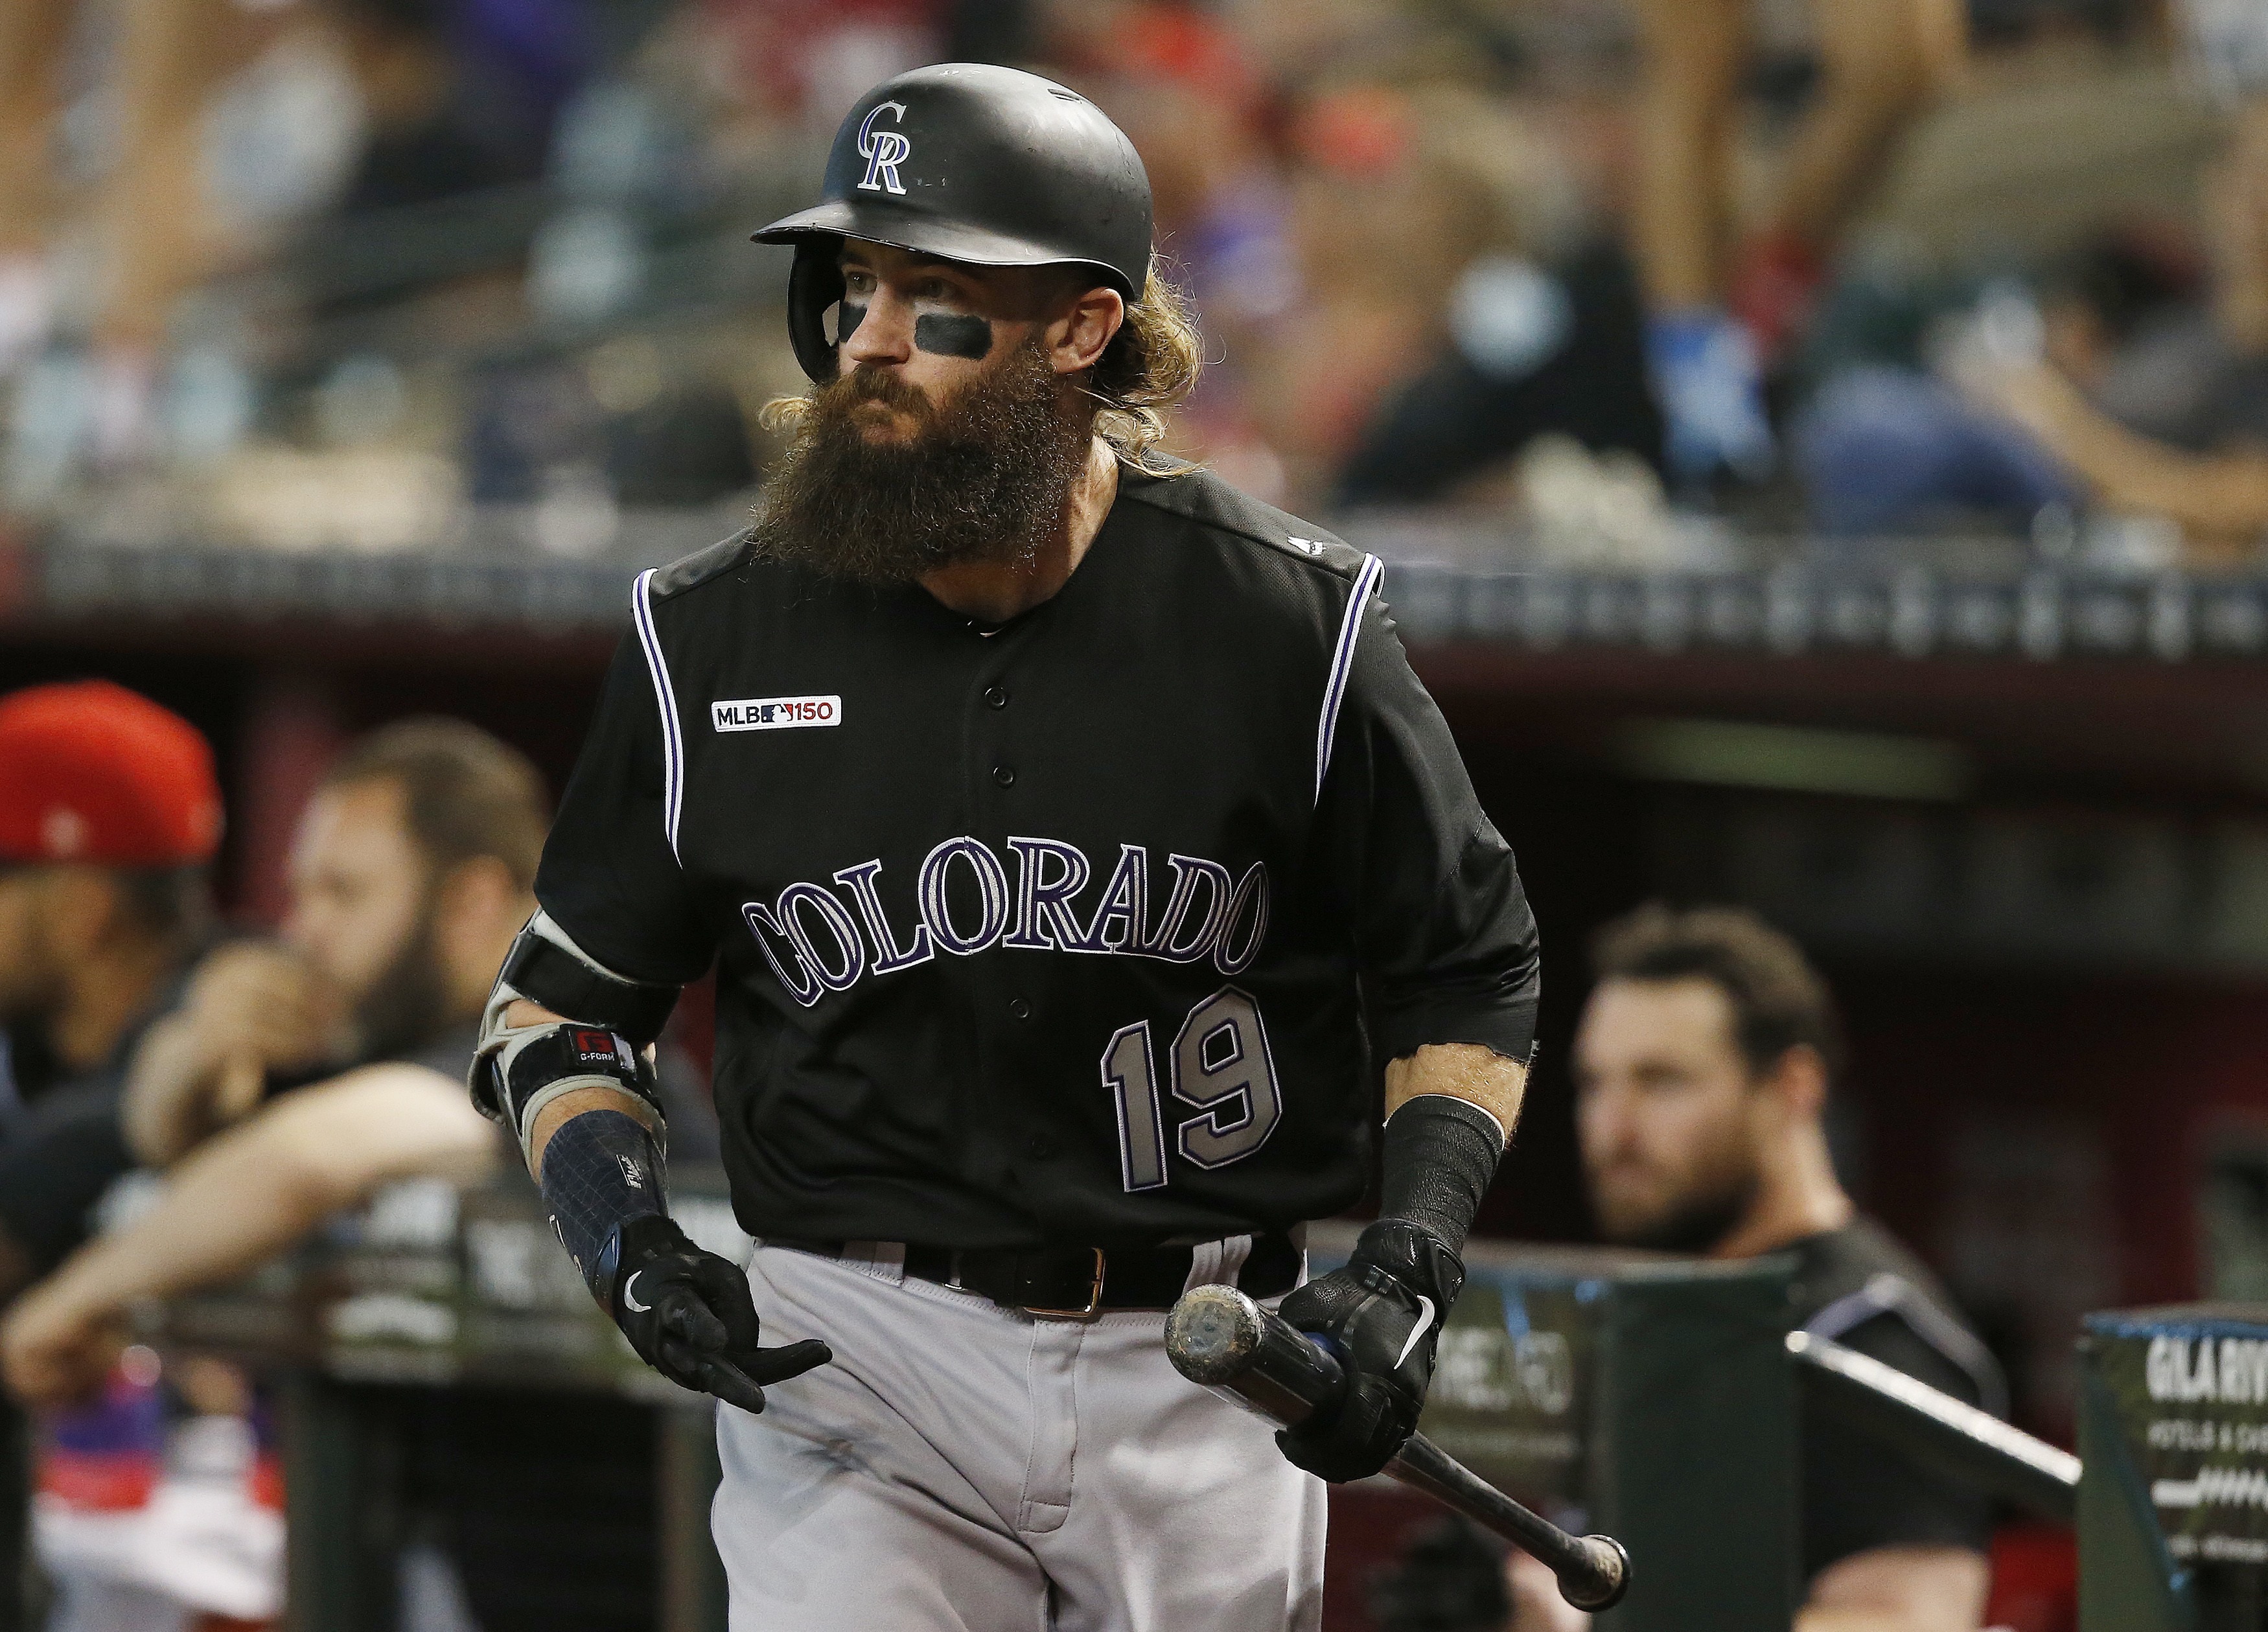 Charlie Blackmon, two other Rockies players test positive for COVID-19